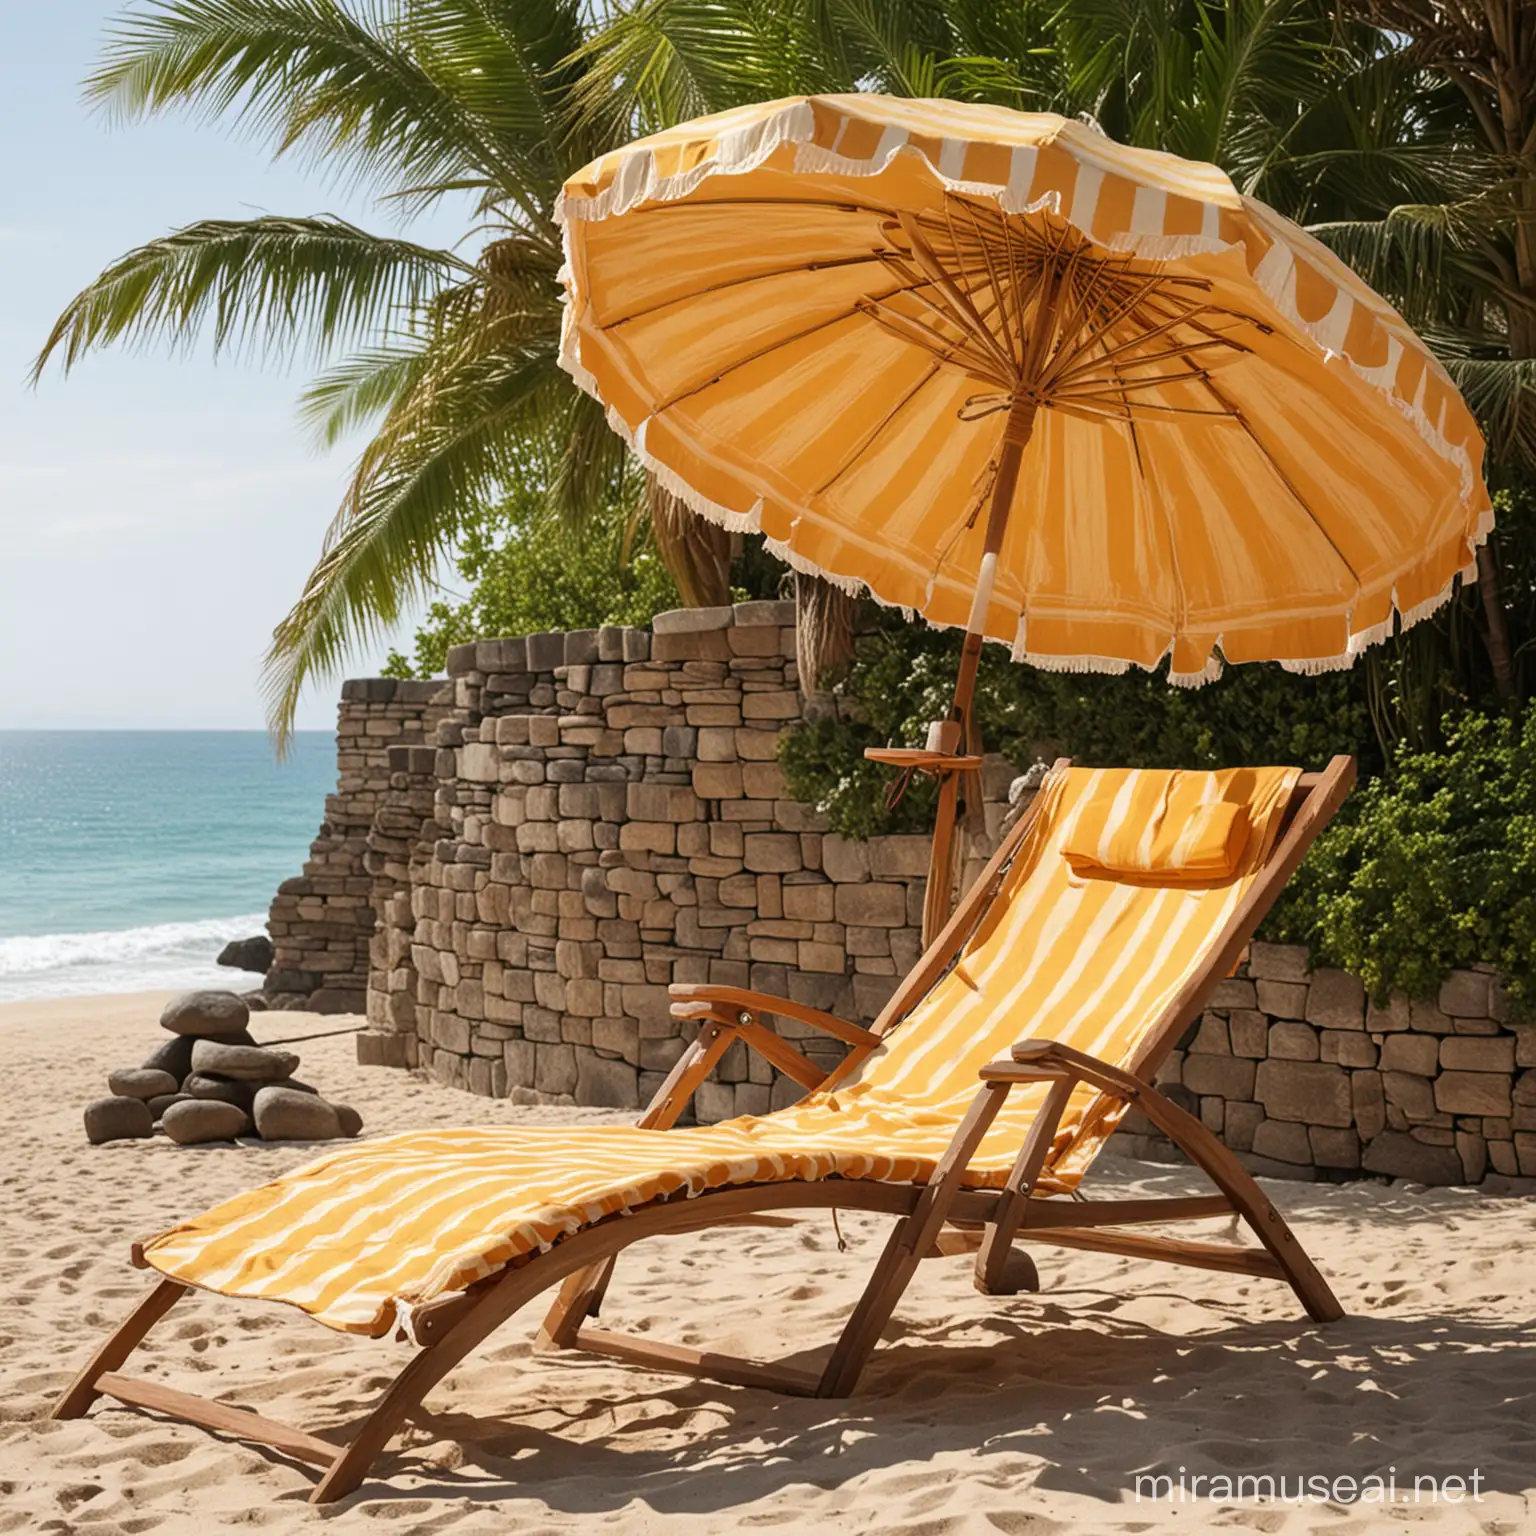 Sunny Beach Relaxation with Comfortable Chair and Umbrella